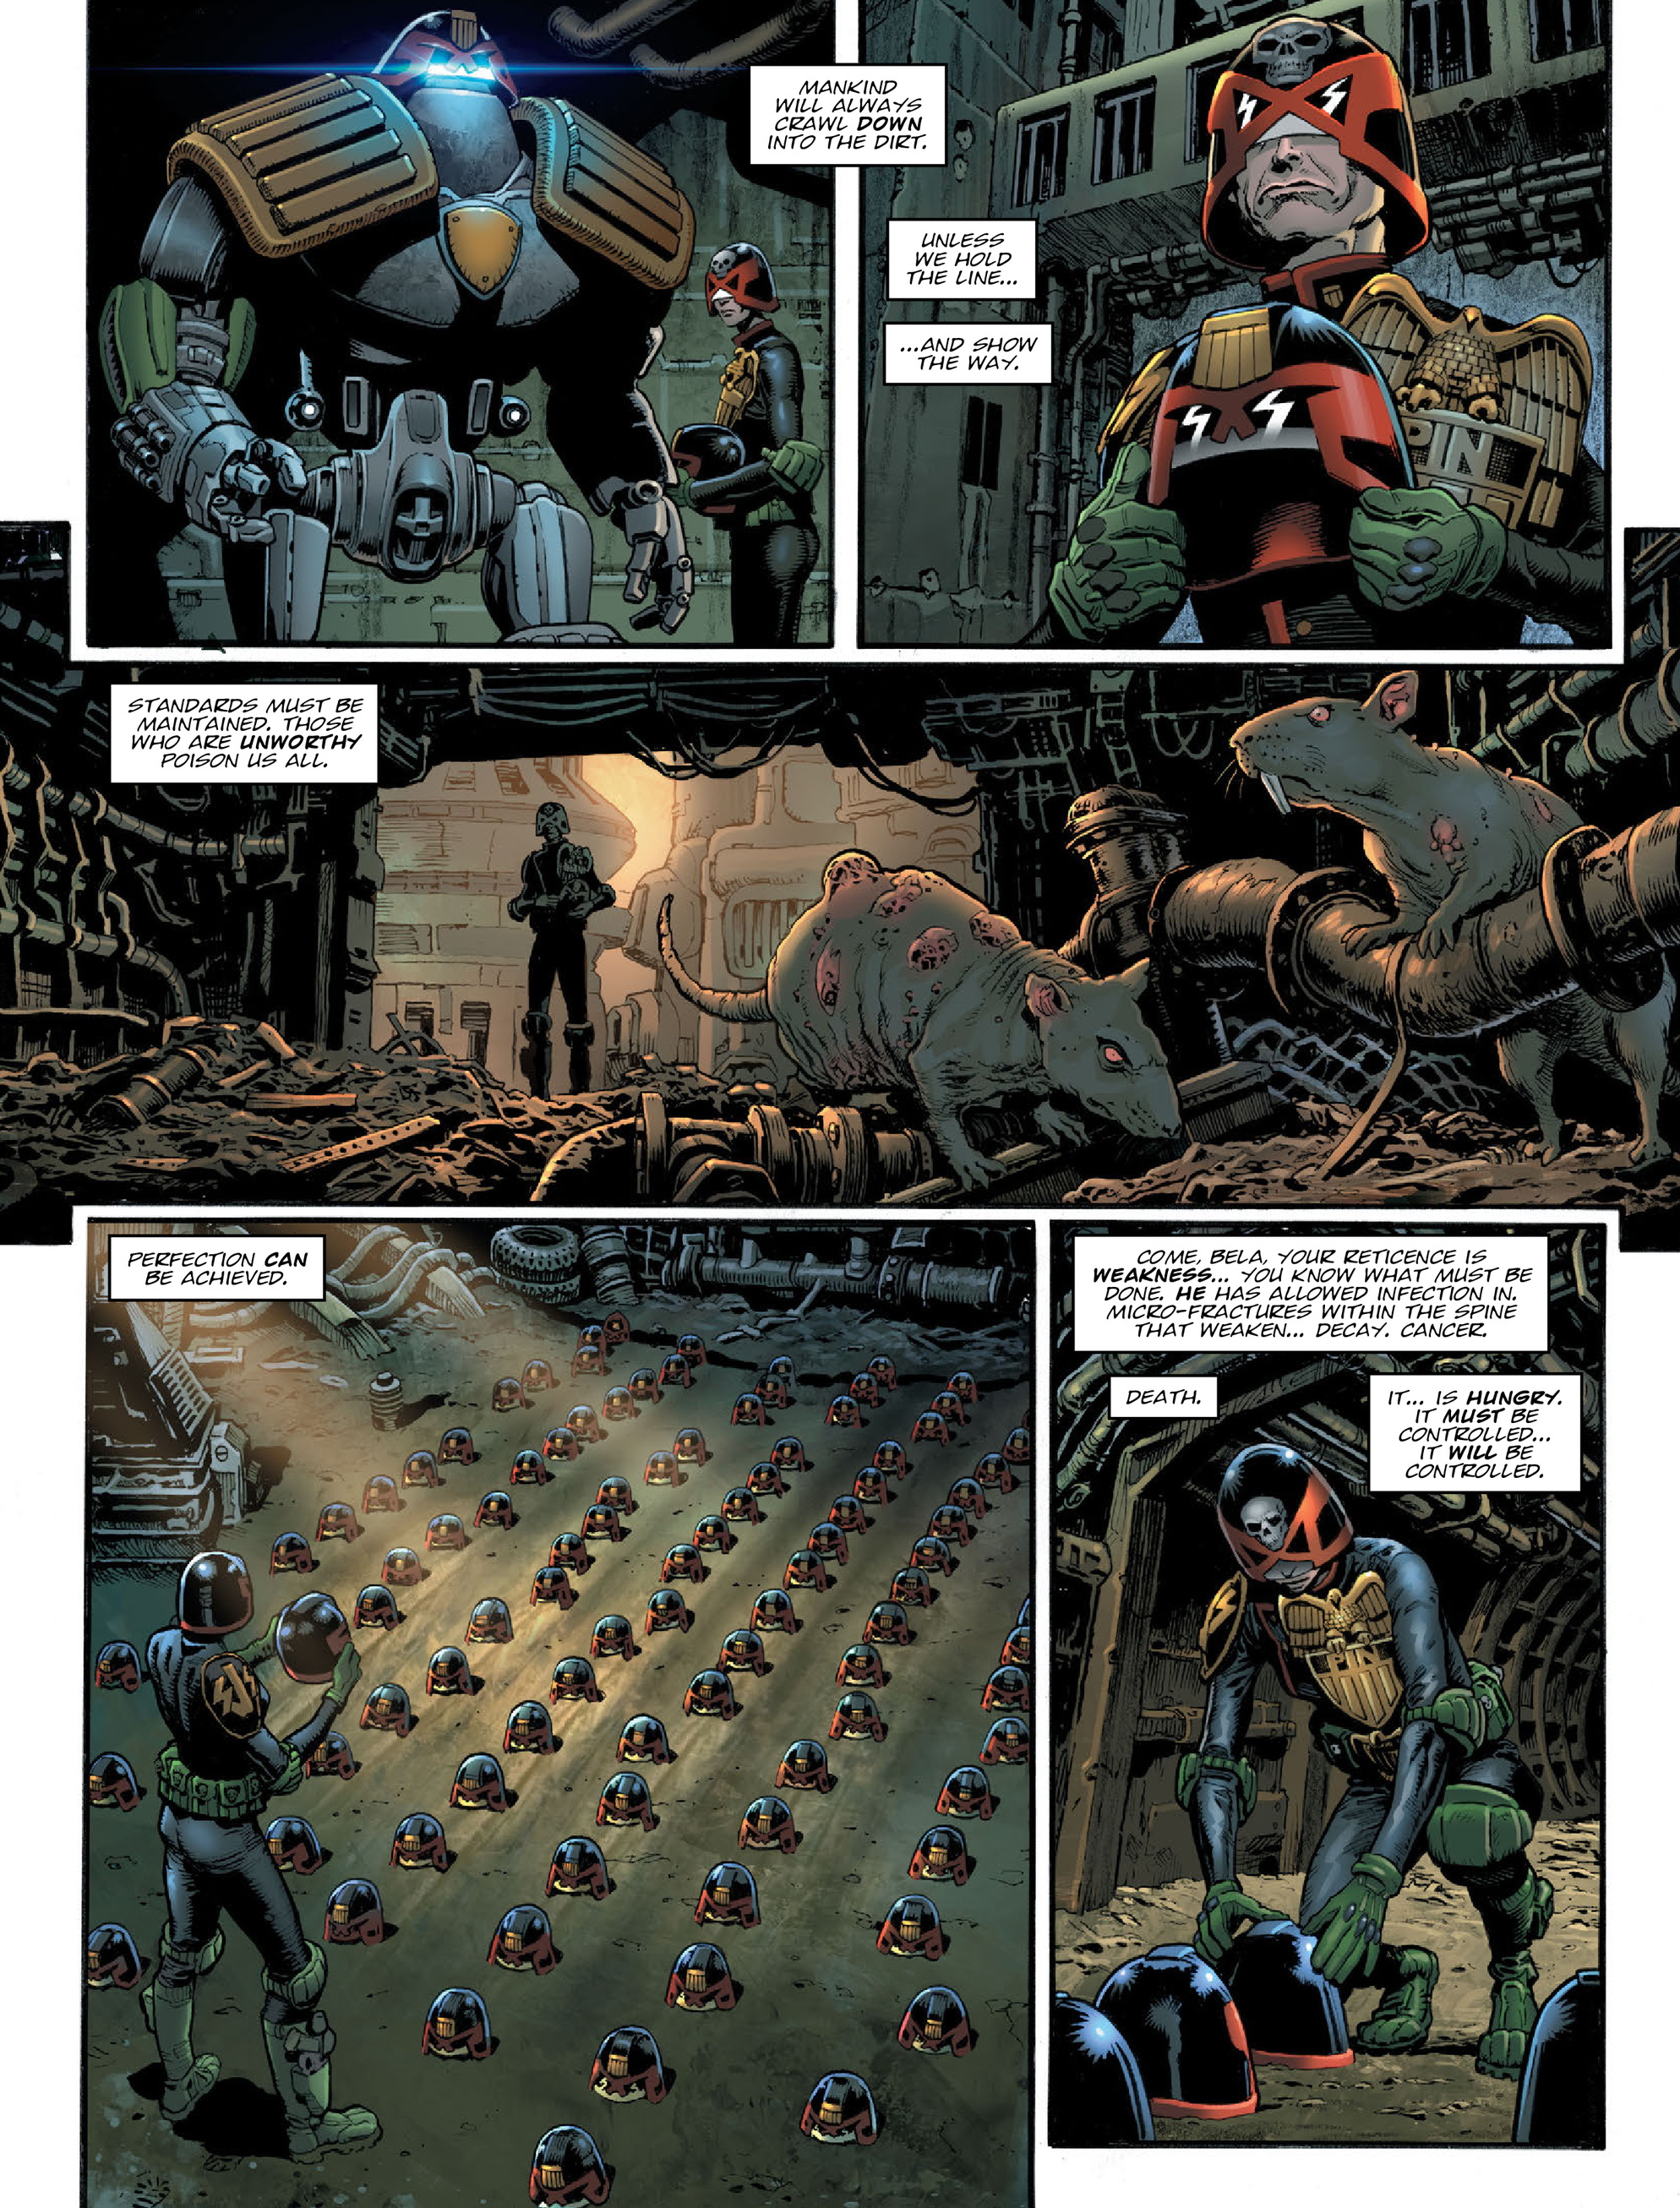 2000 AD: Chapter 2141 - Page 4